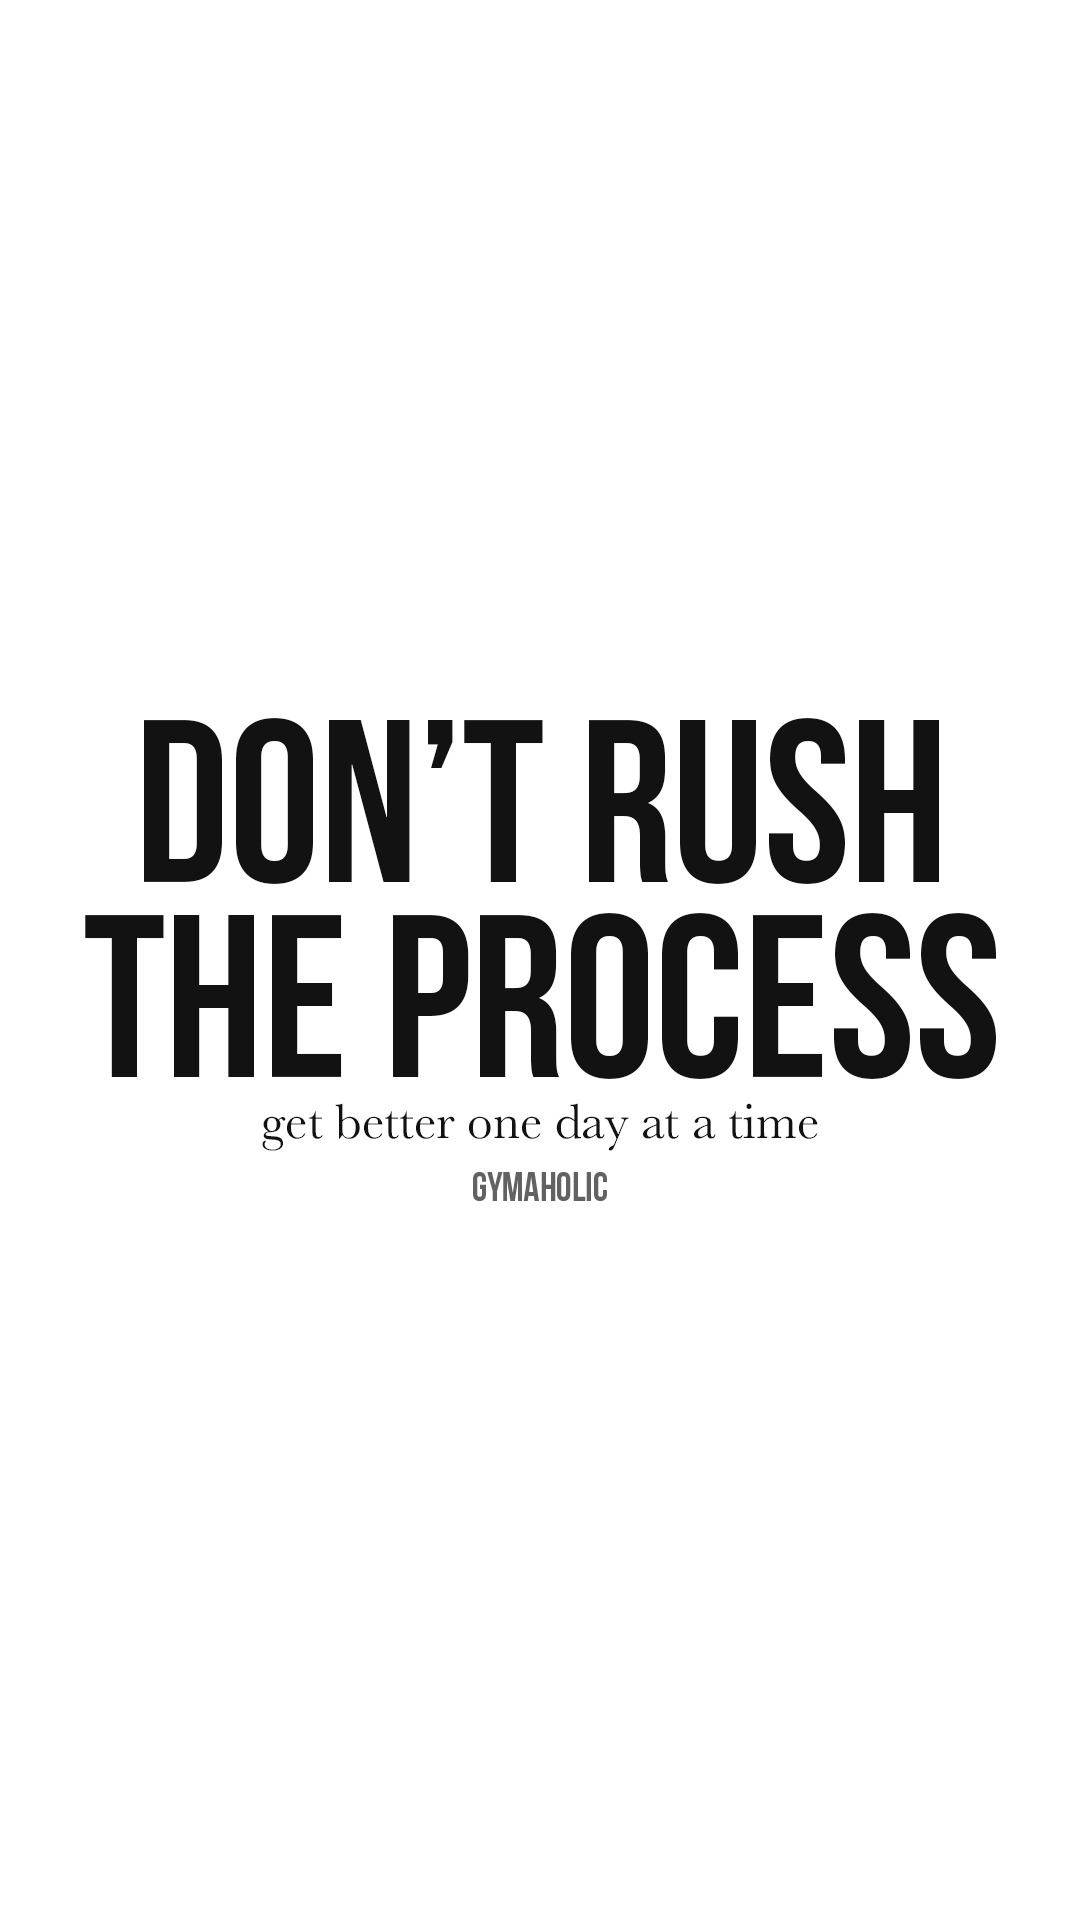 Don’t rush the process